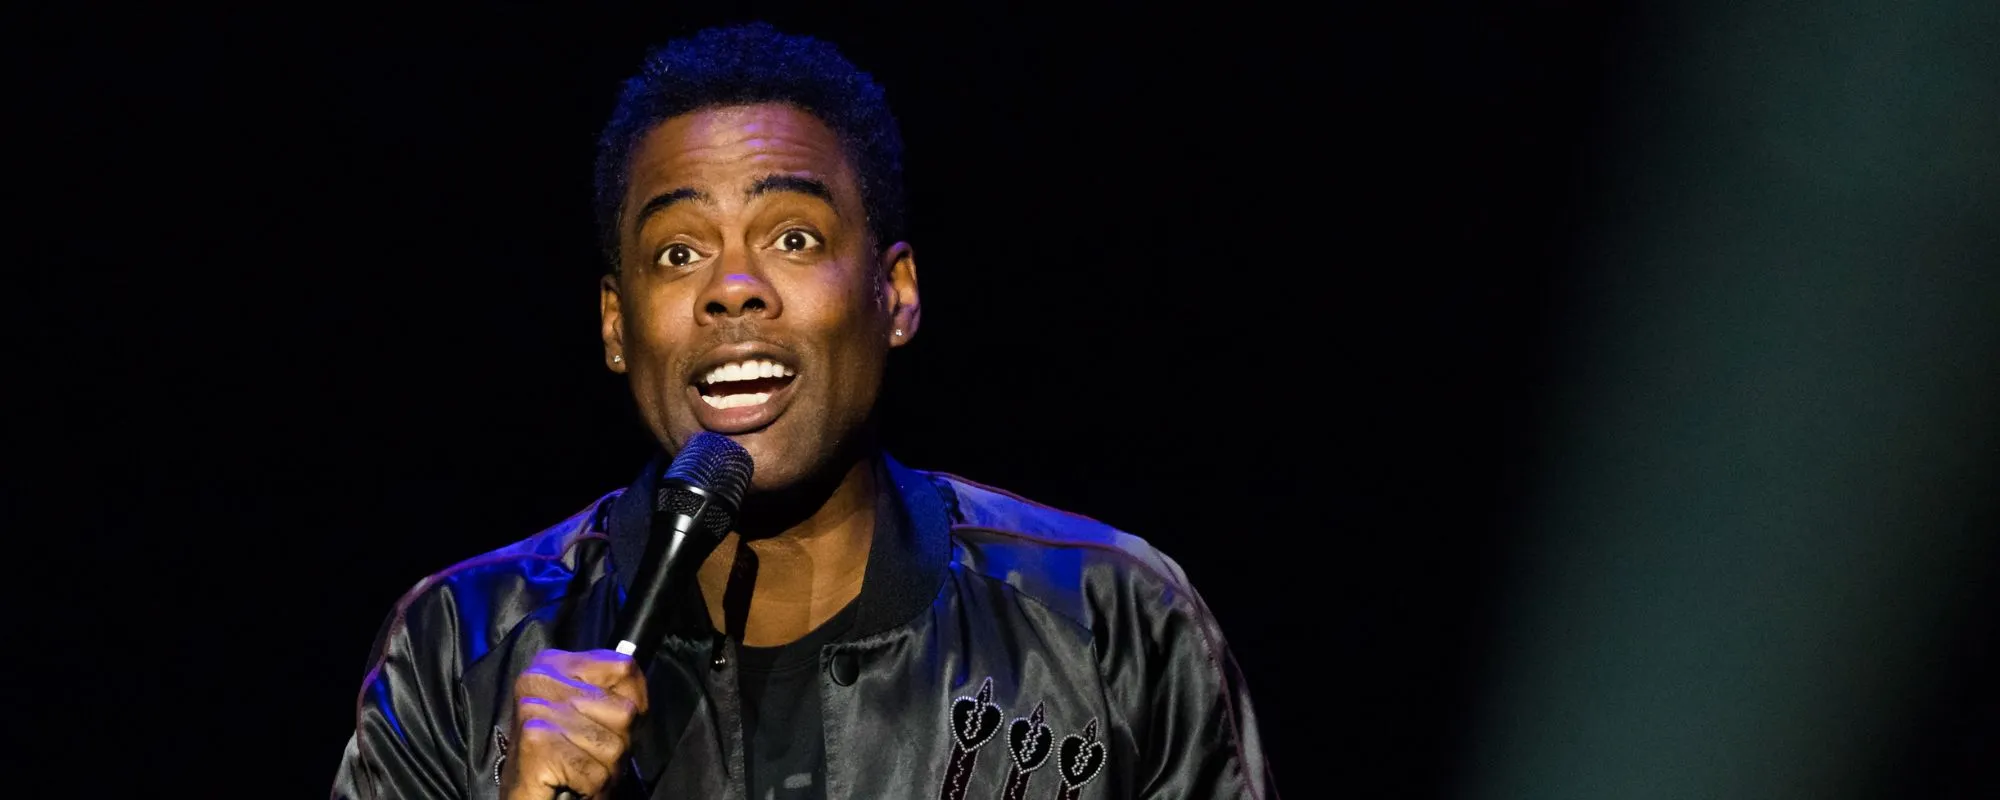 3 Songs You Didn’t Know Featured Chris Rock